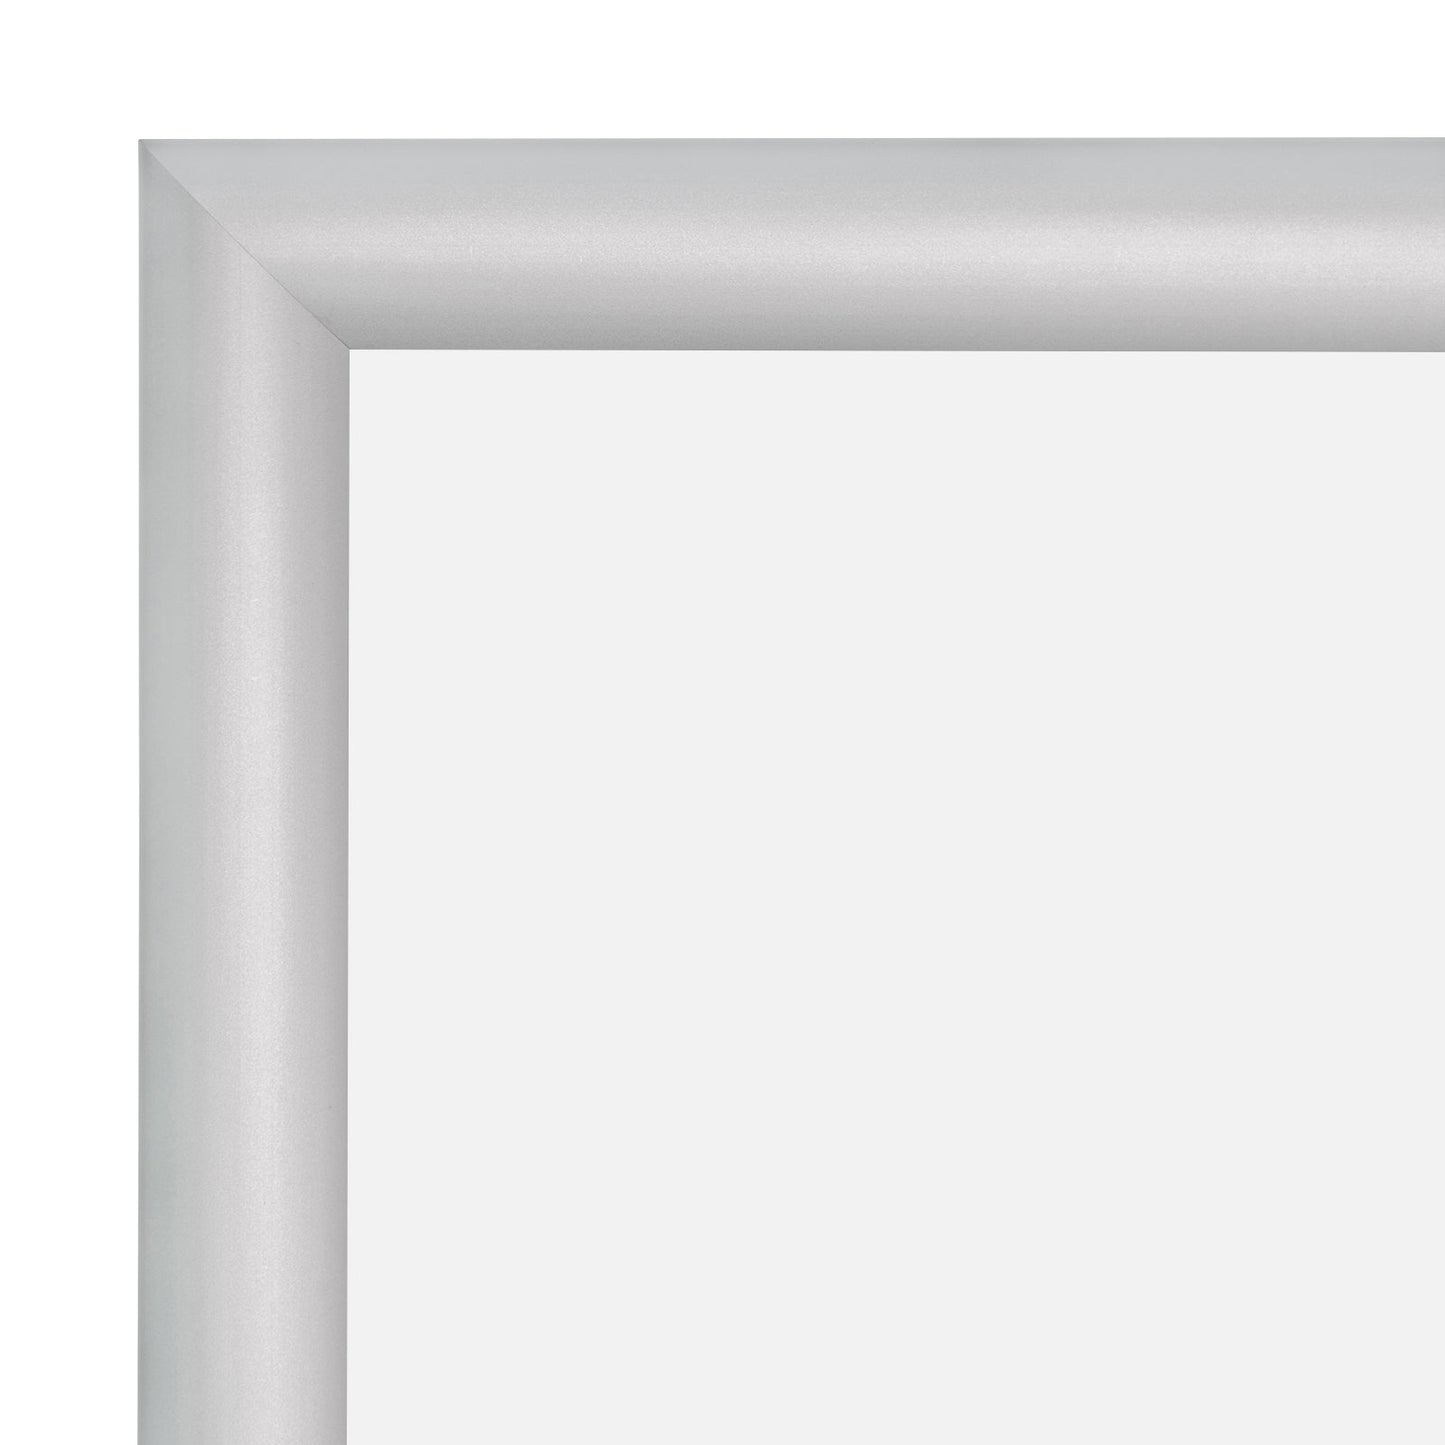 A2 (16.5 x 23.4 inches) Silver Snap Frame - 1" Profile - Snap Frames Direct